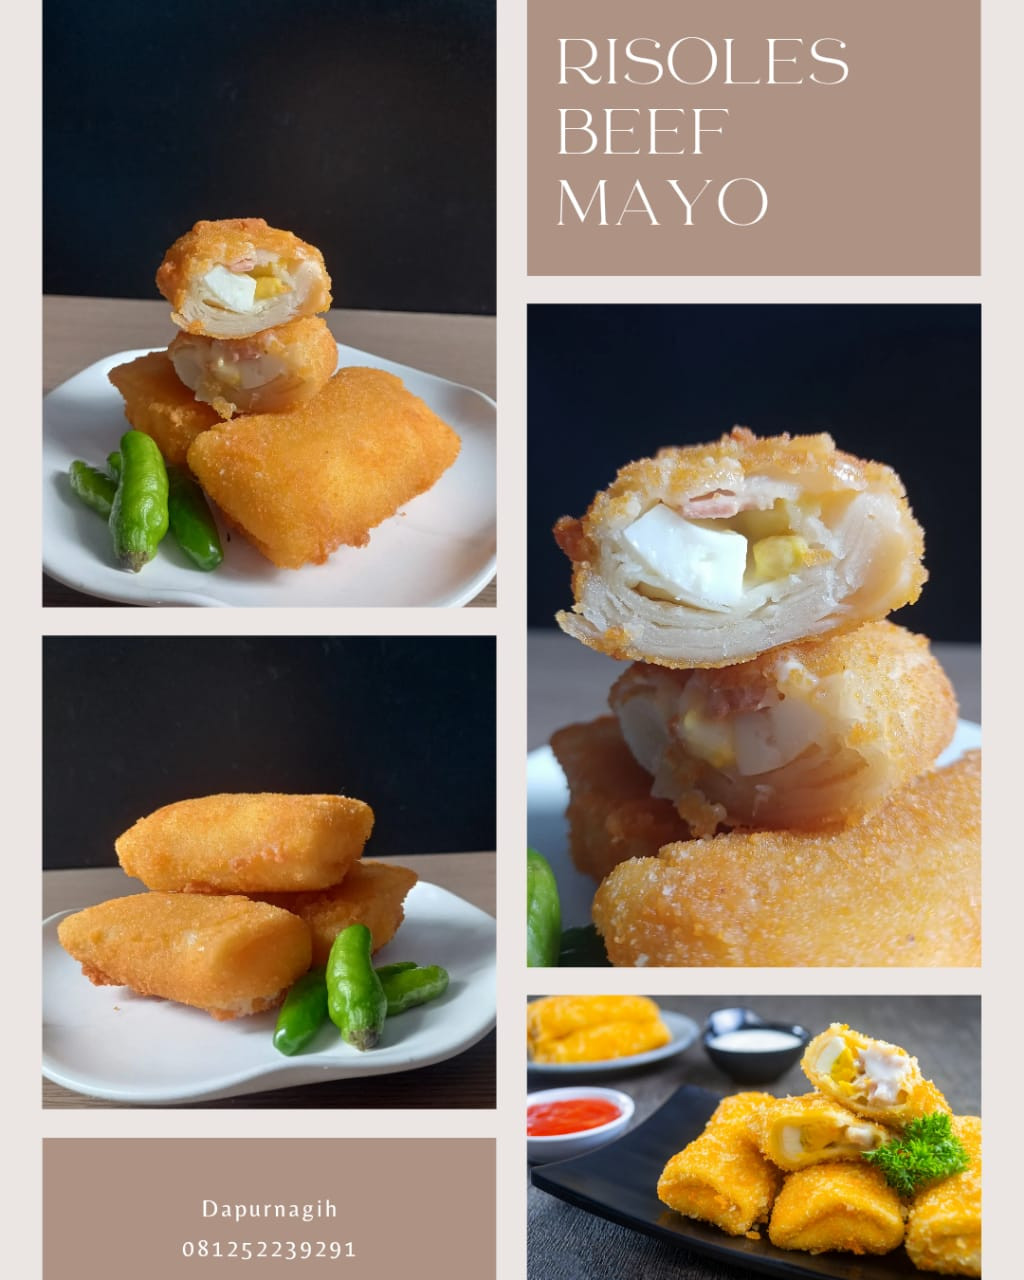 Risoles Beef Mayo